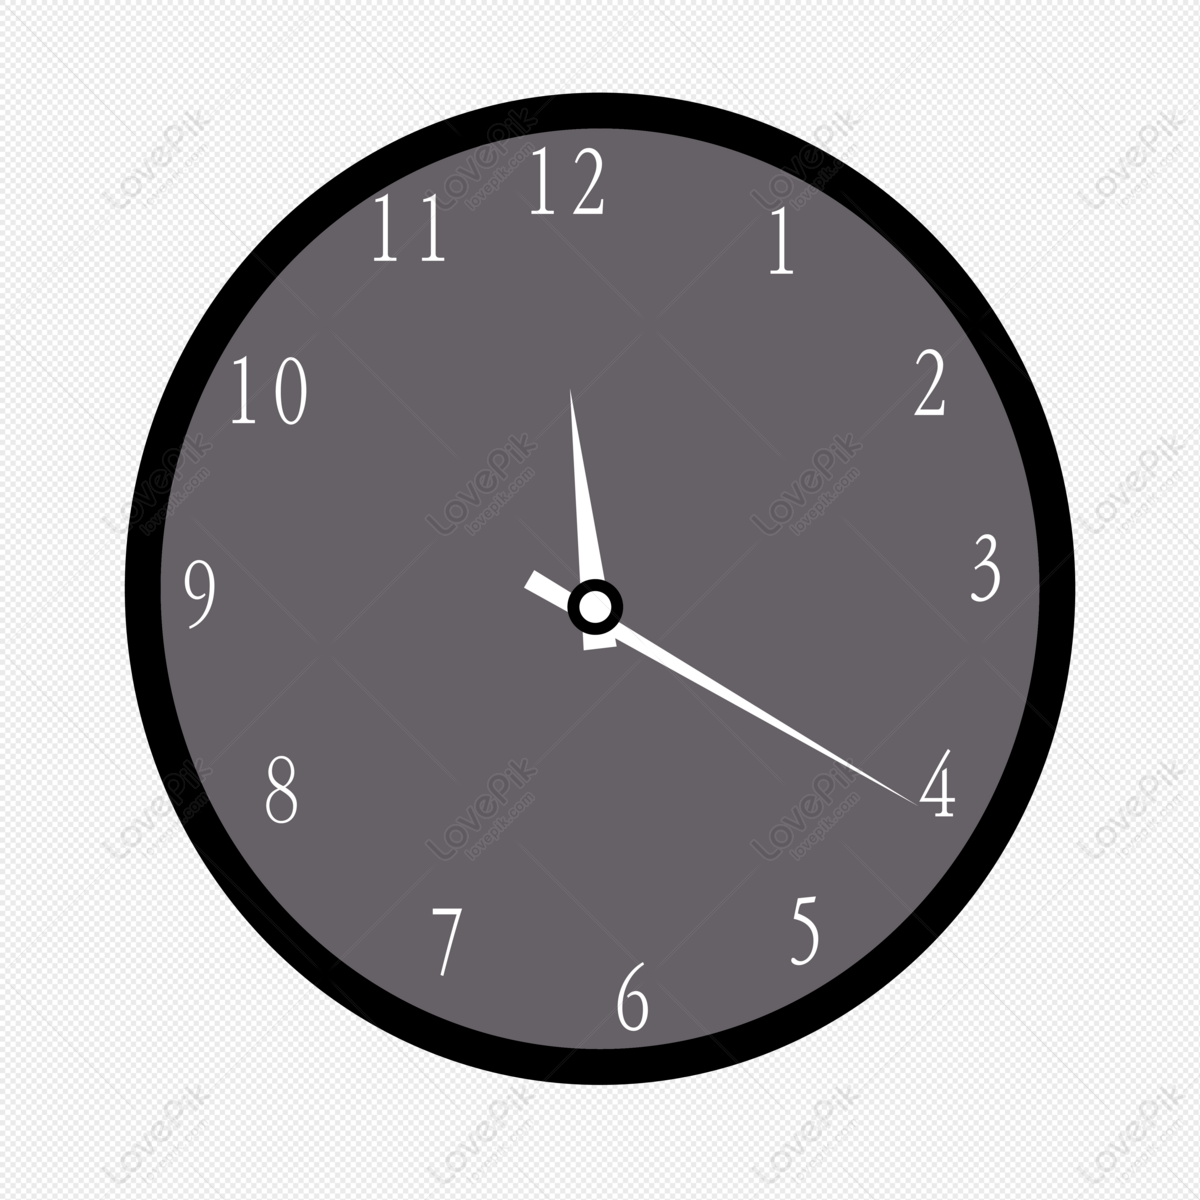 Clocks And Watches PNG Image Free Download And Clipart Image For Free ...